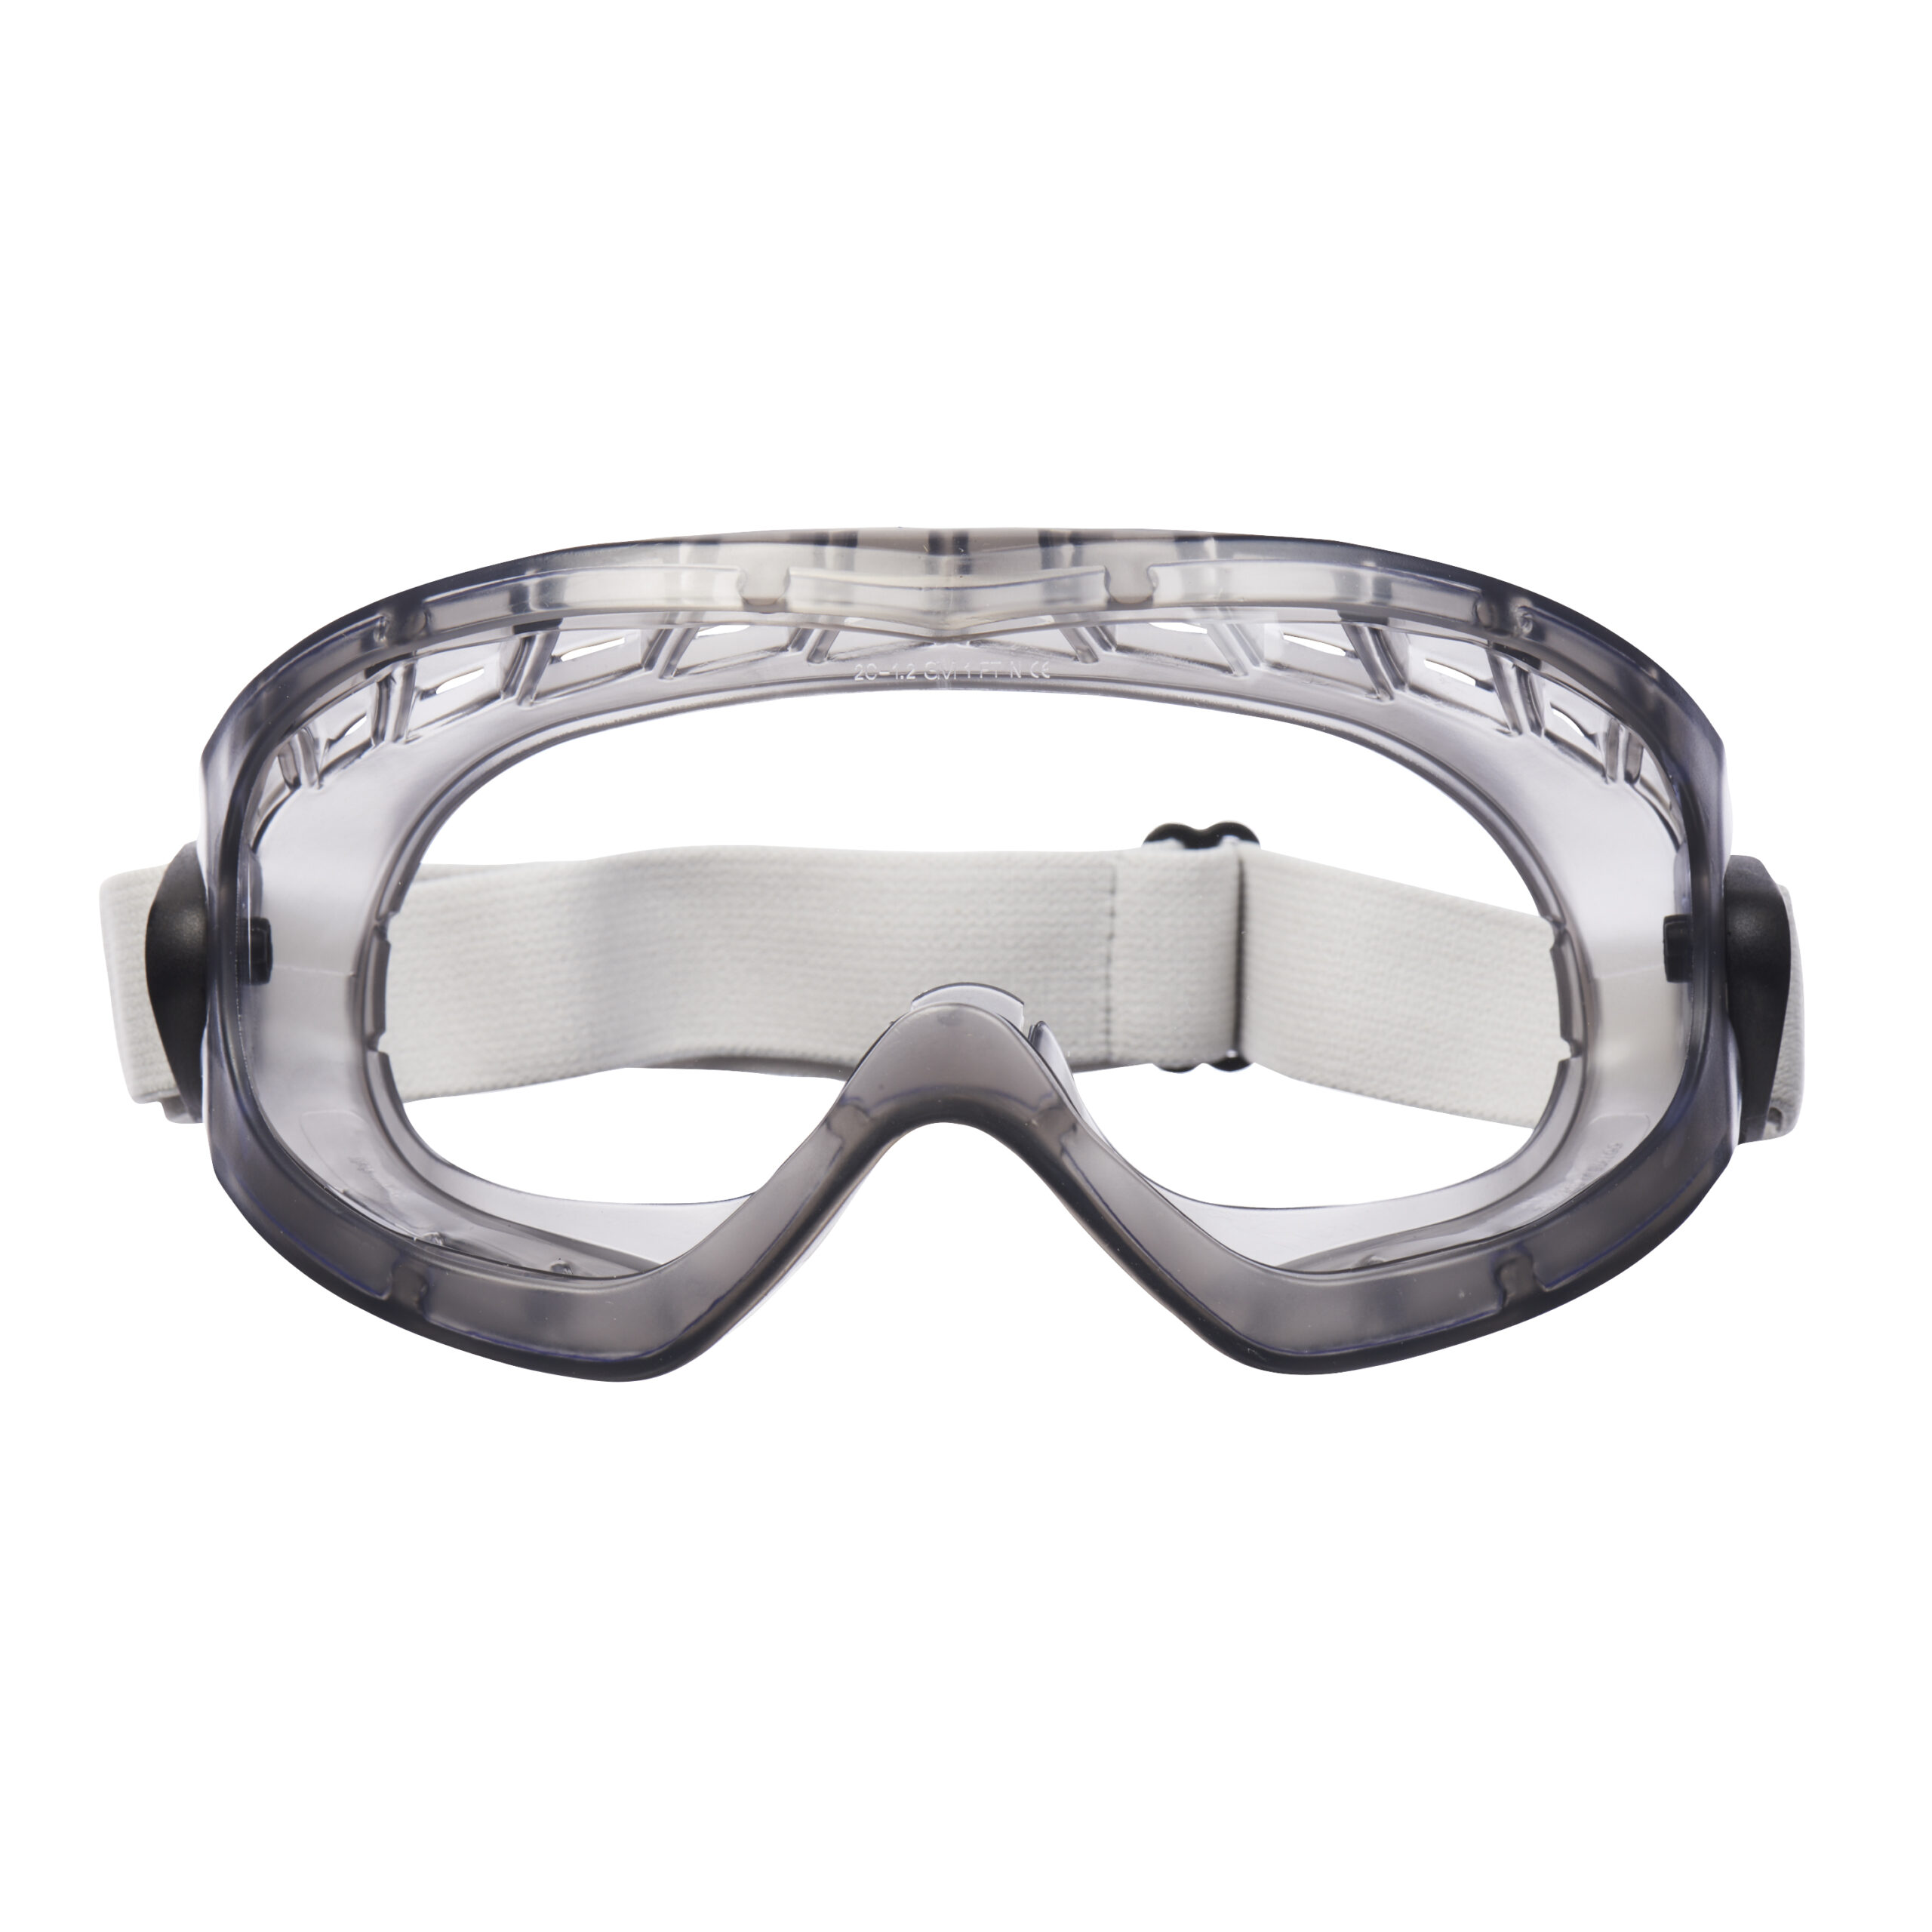 Goggles Premium Safety 2890A 3M